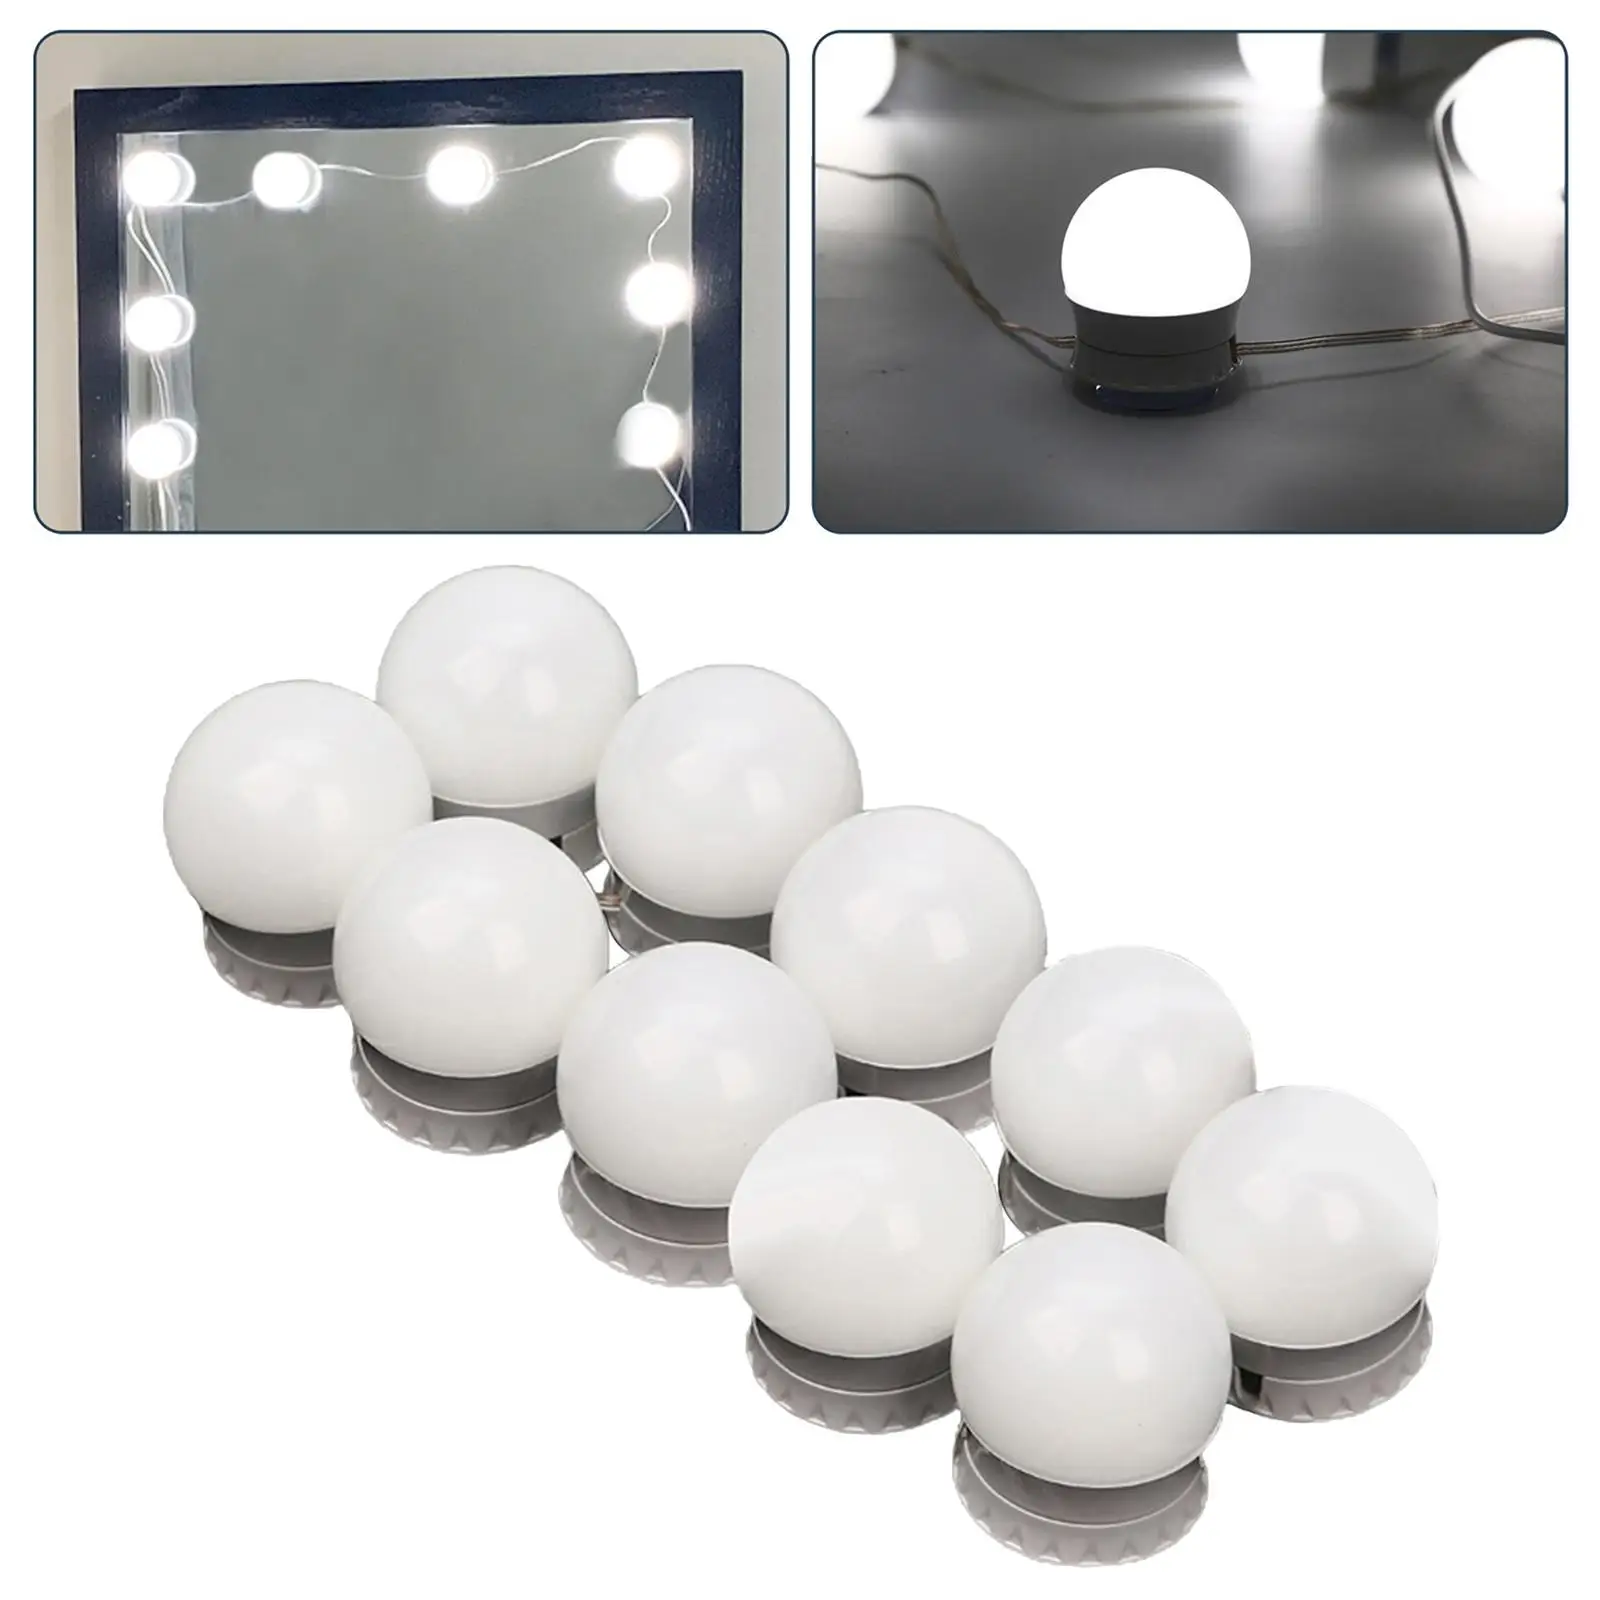 Makeup LED for Mirror With Light Bulbs Vanity Cosmetic Light & Suction Cup